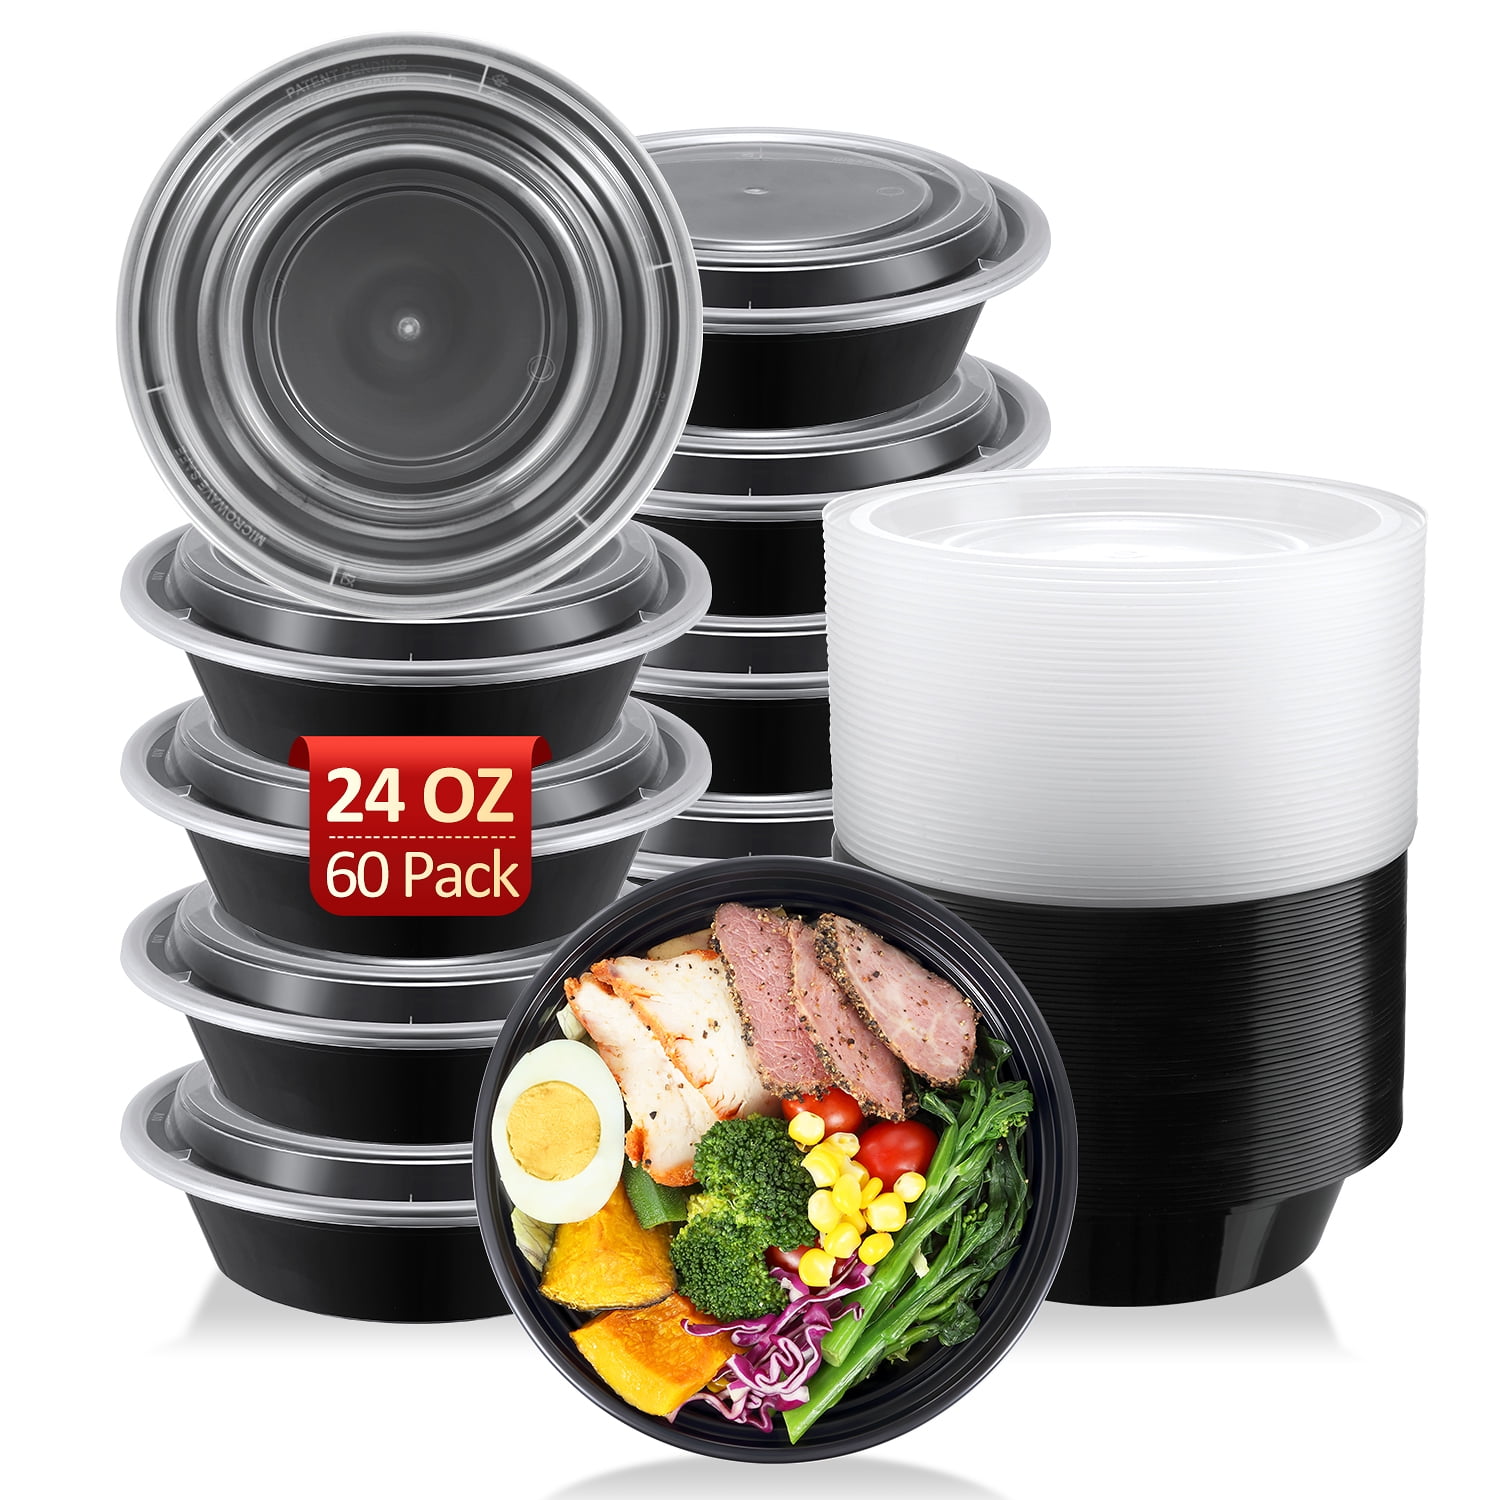 25 Count] 16 oz Black Plastic Meal Prep Containers with Lids